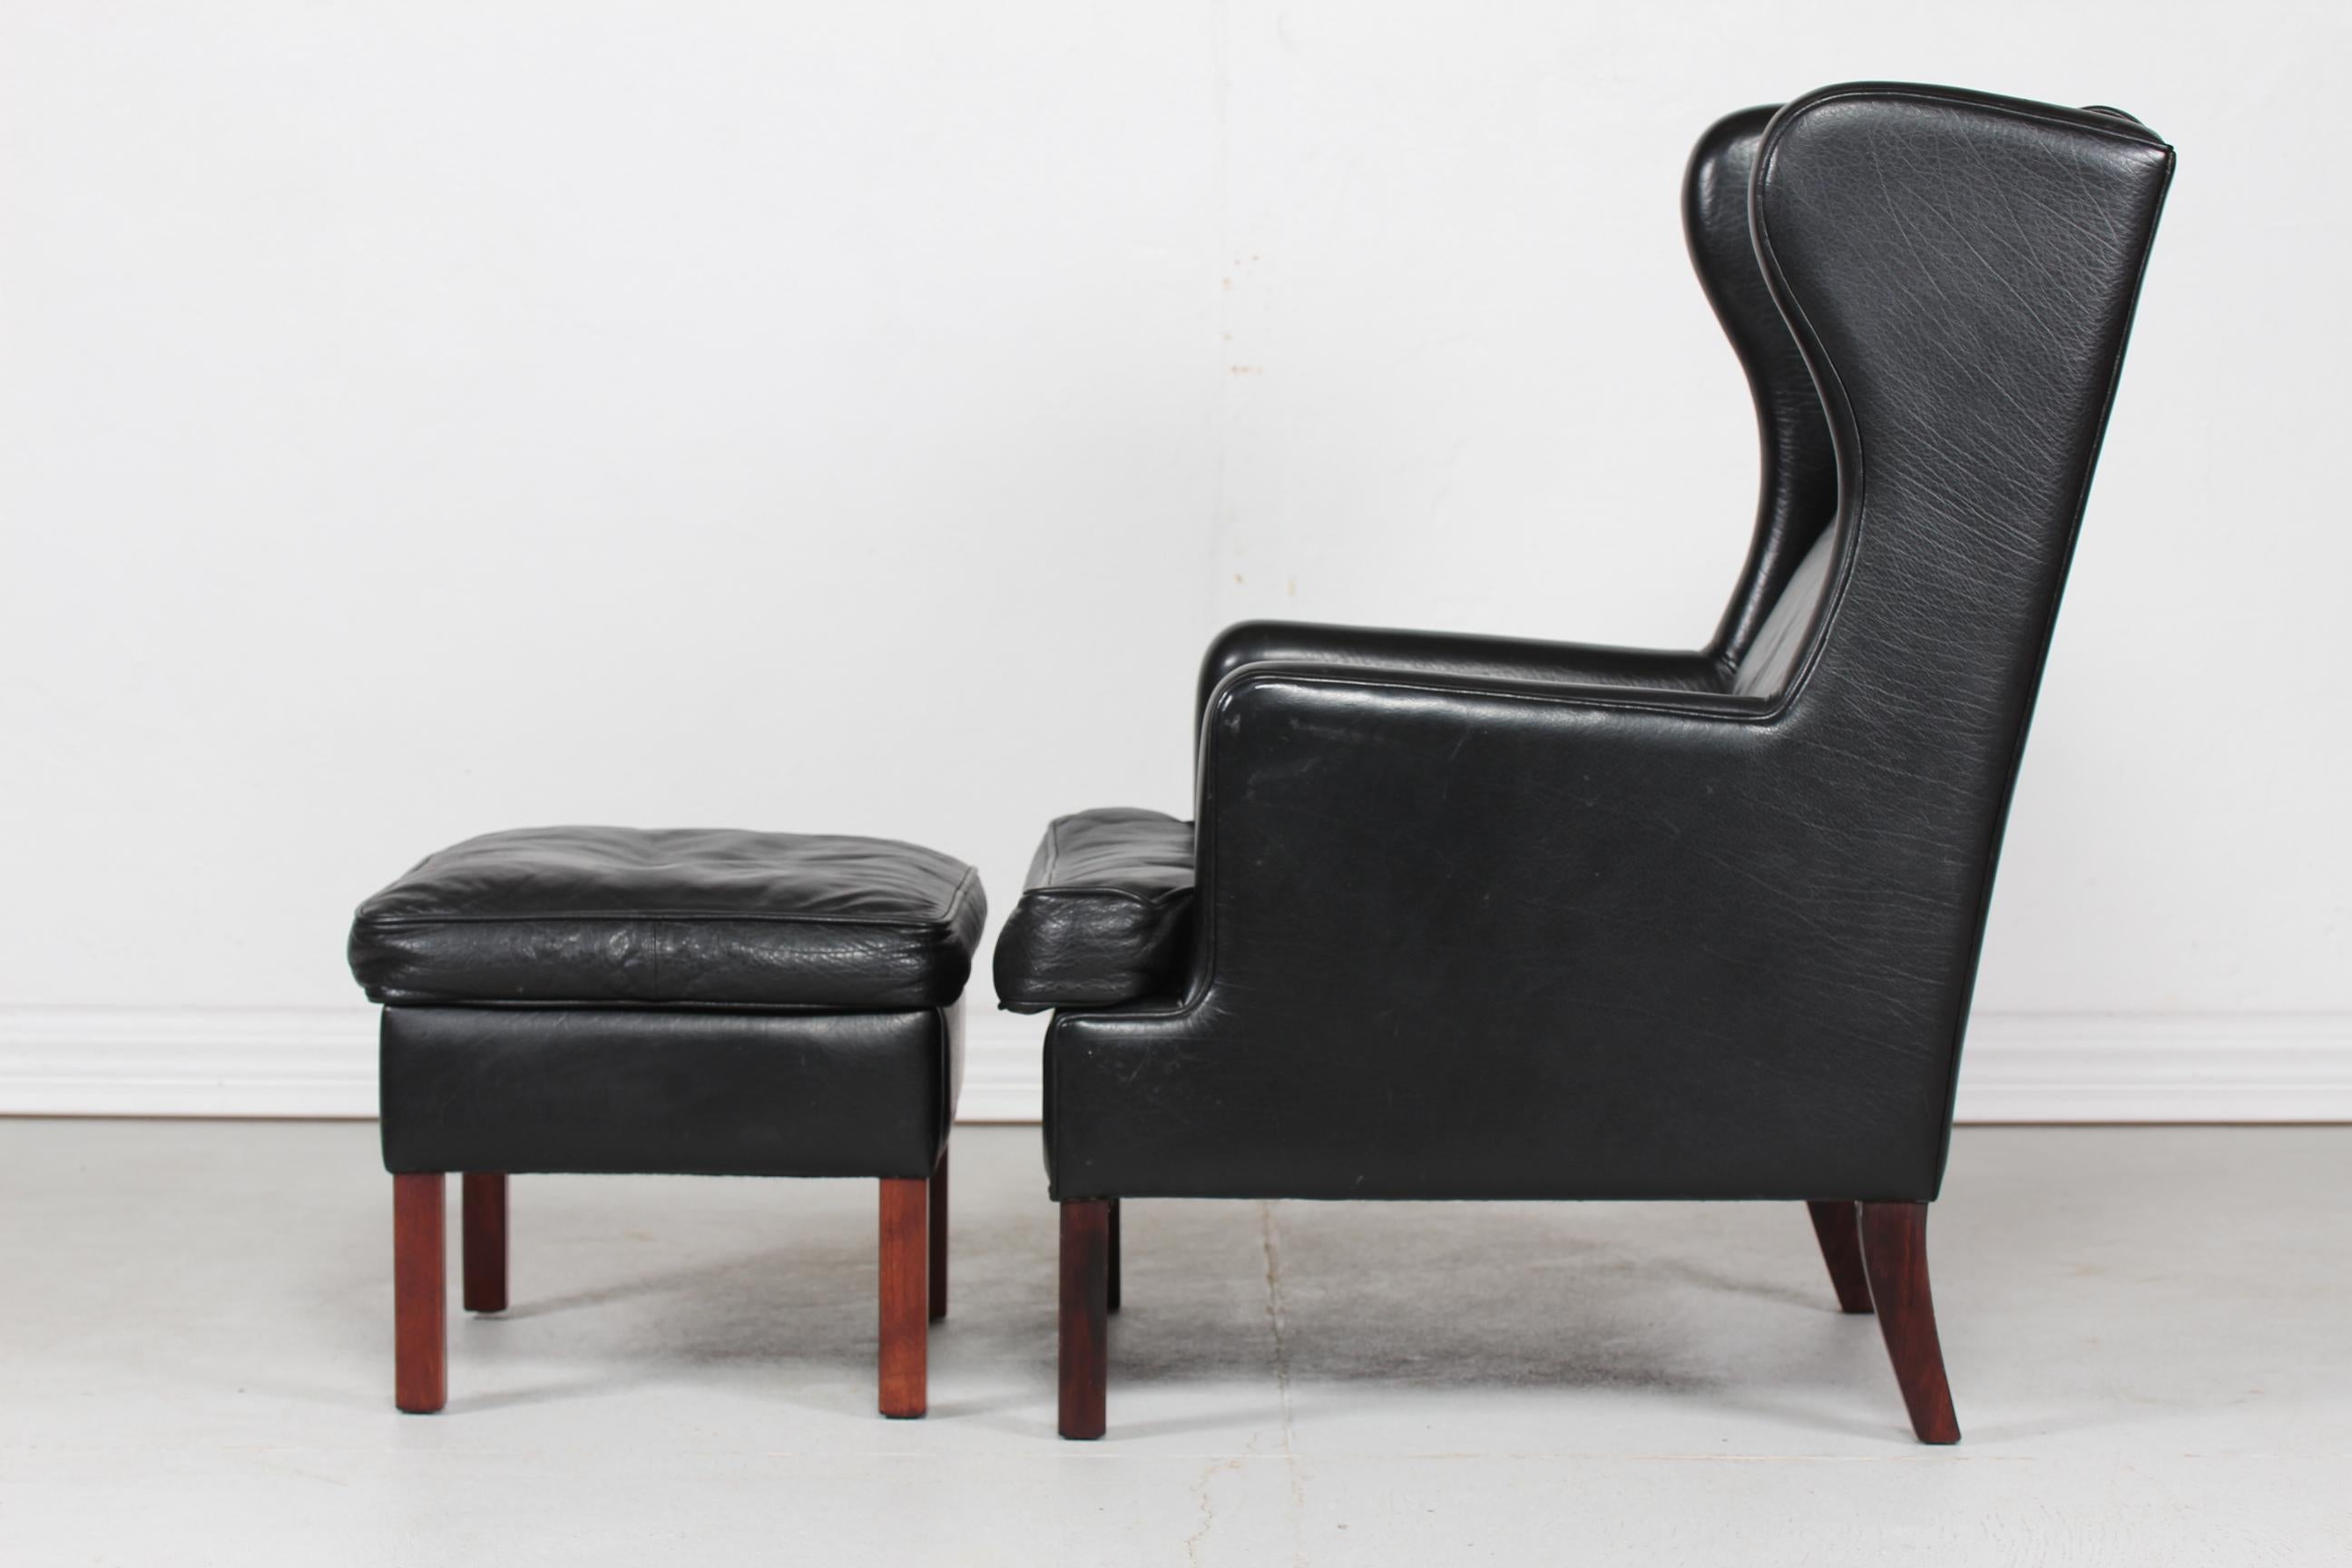 Late 20th Century Danish Modern Wingback Chair and Stool with Black Leather in Kaare Klint Style For Sale